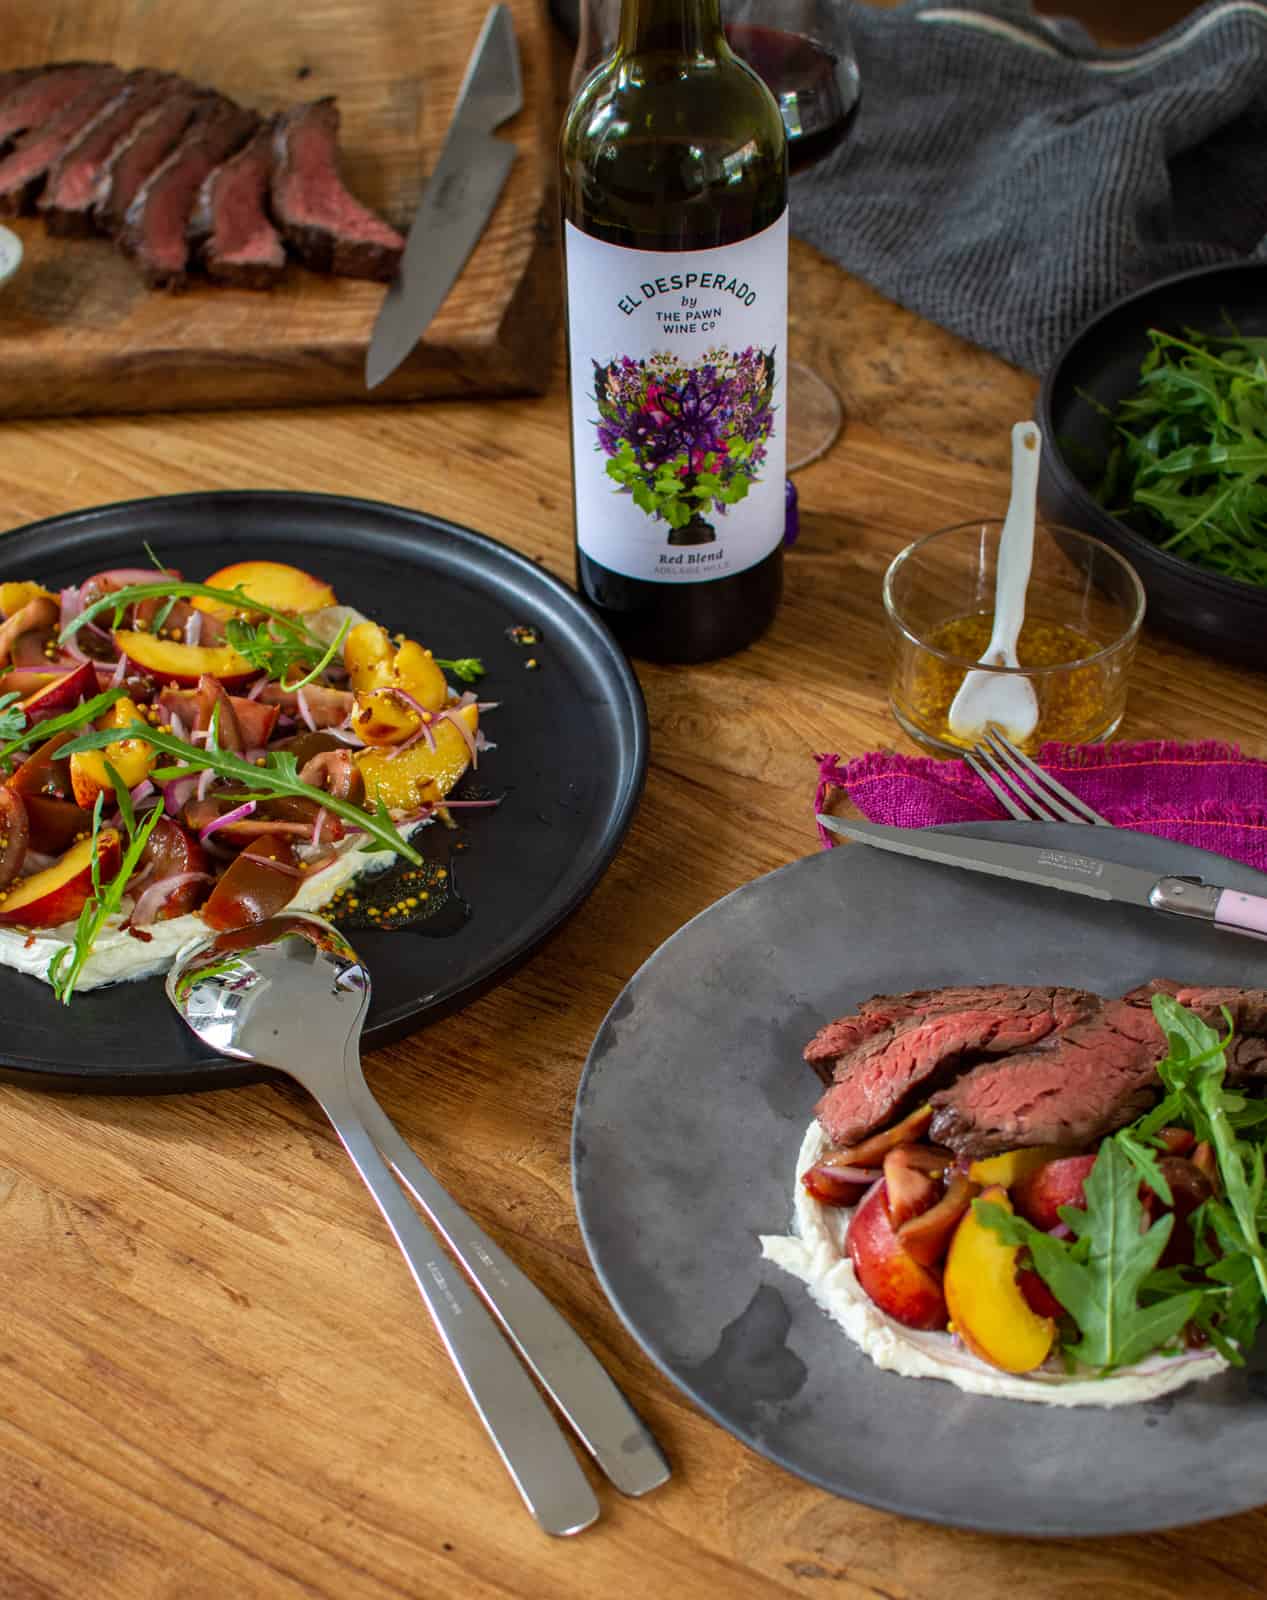 Plates of grilled bavette steak with peach, tomato salad on a table with bottle of red wine beside the plates